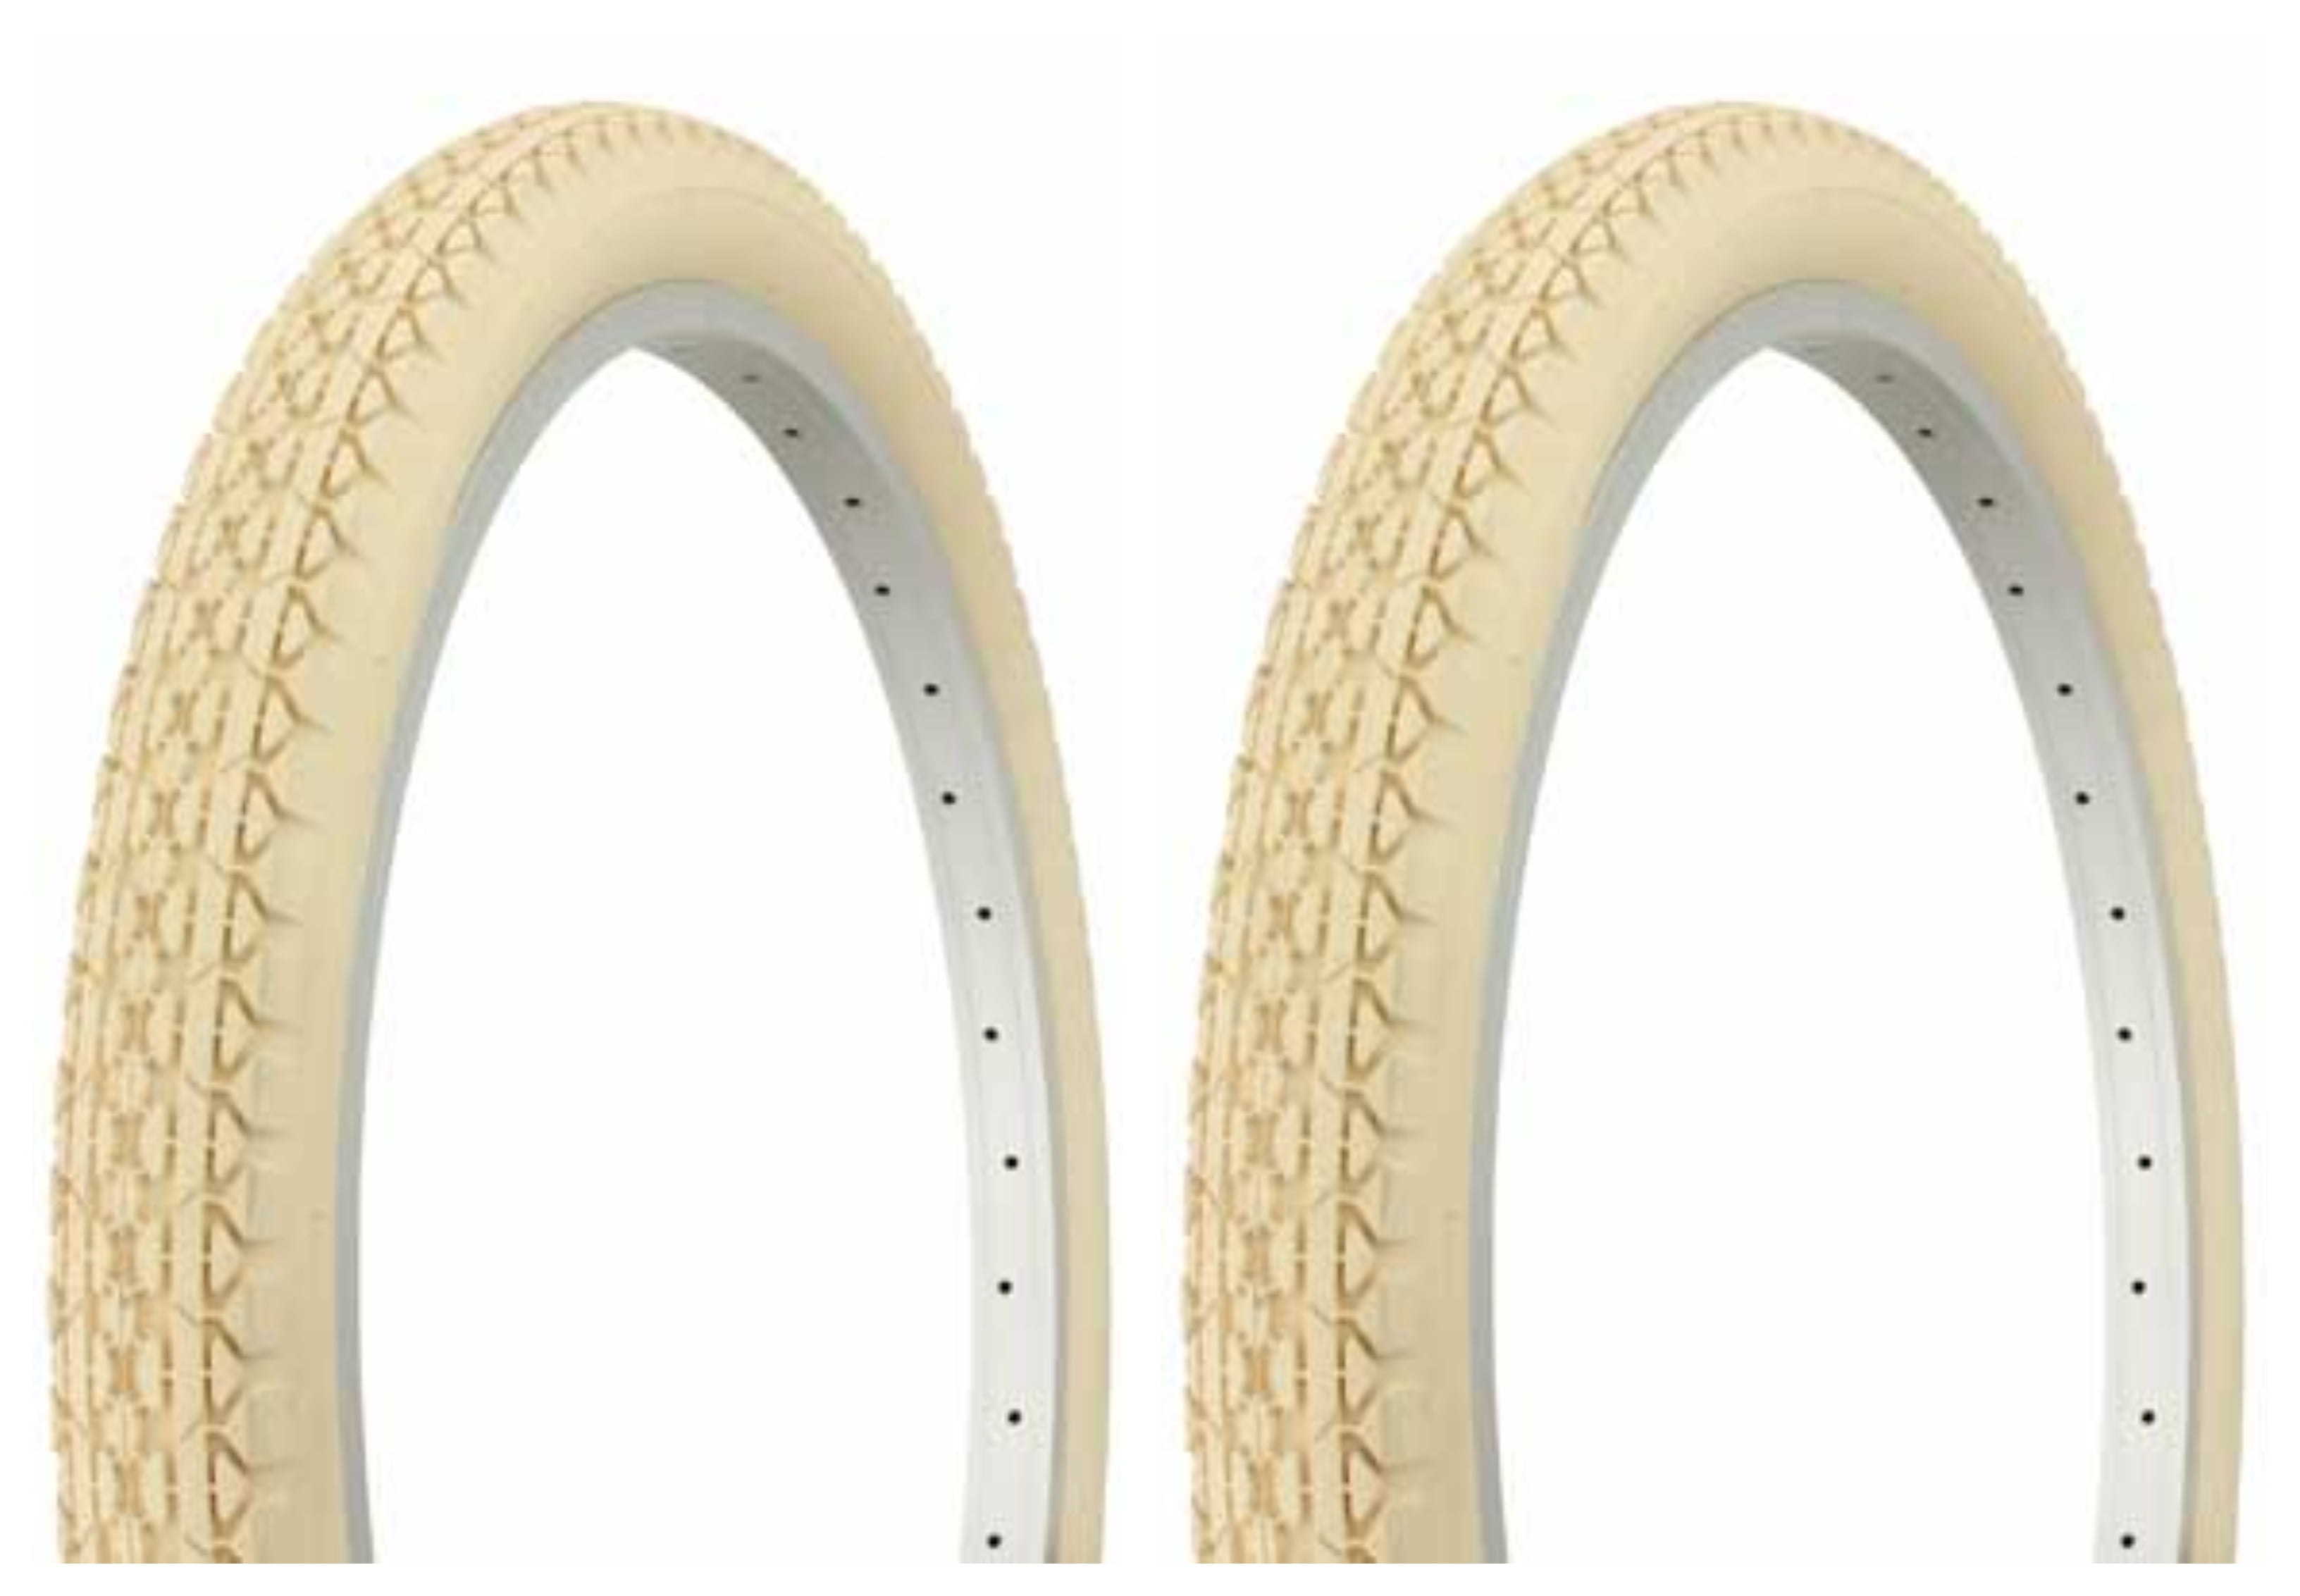 TWO 2 DURO 24X2.125 BICYCLE TIRES DIAMOND PATTERN,GUMWALL,CRUISERS 